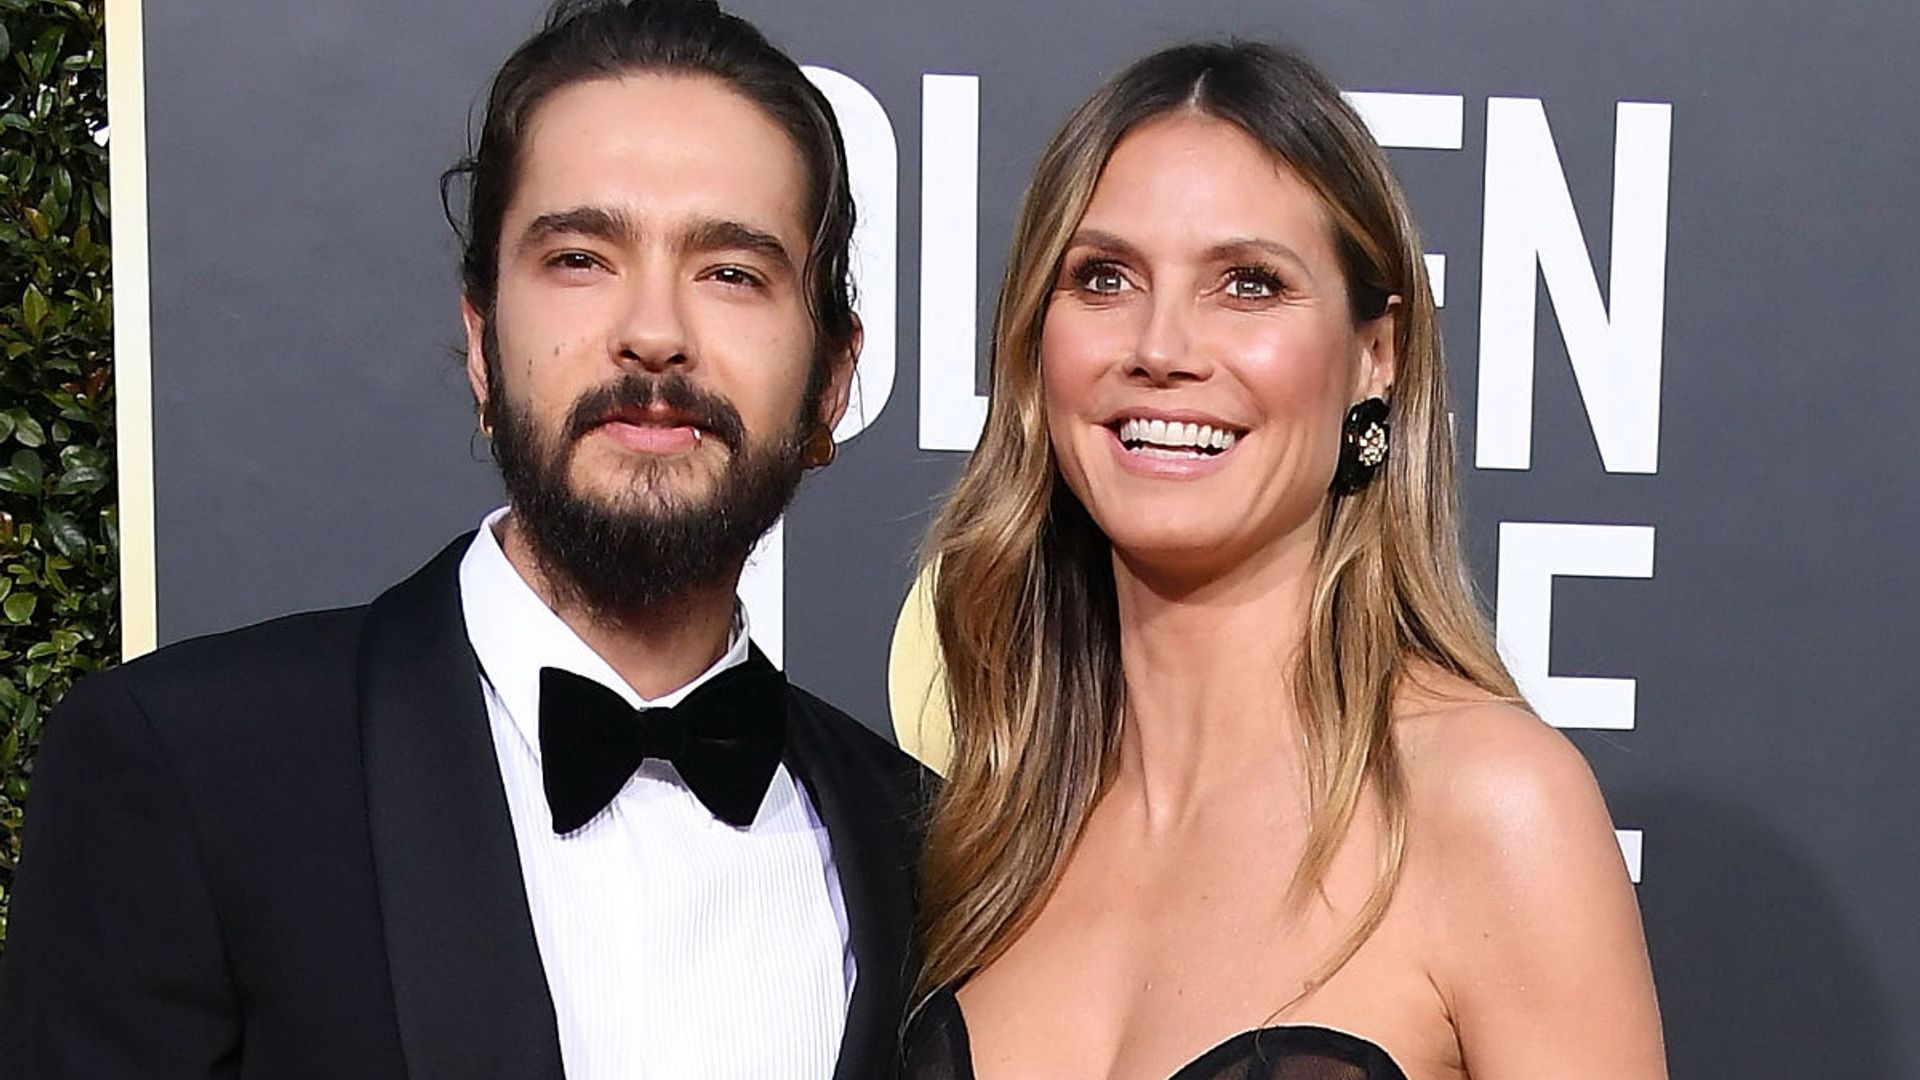 Is Heidi Klum, 45, pregnant with first child with Tom Kaulitz?